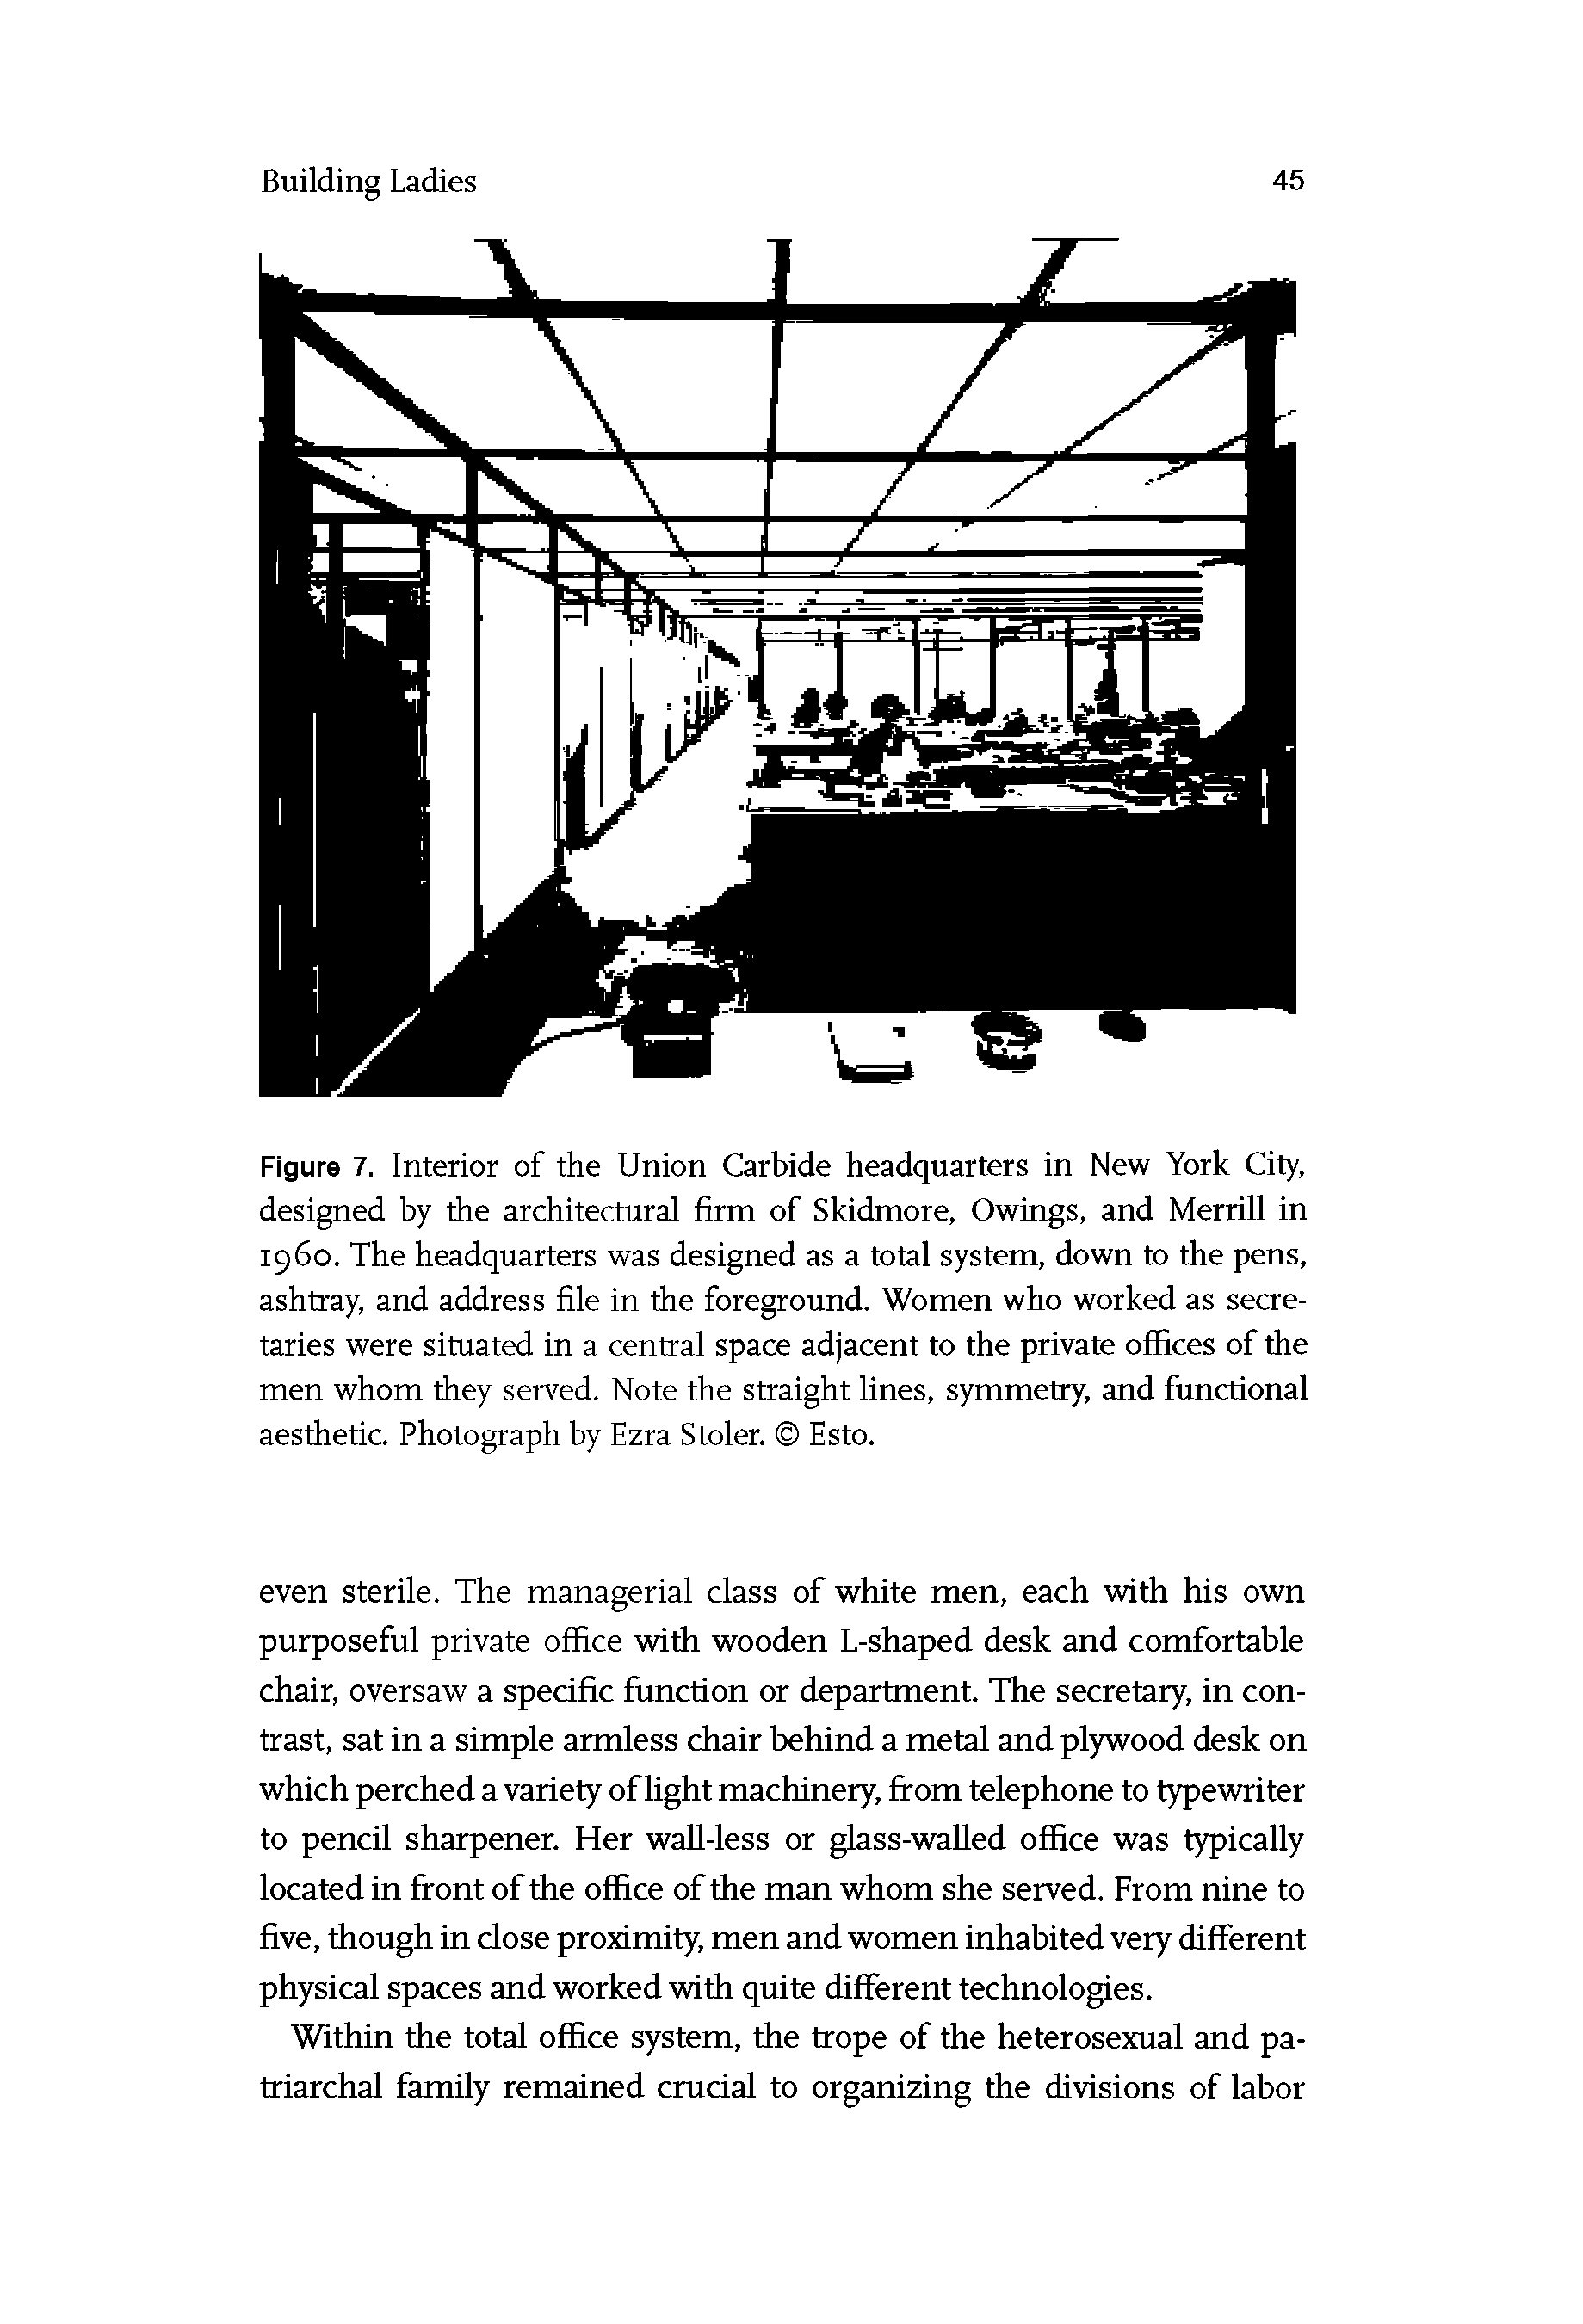 Figure 7. Interior of the Union Carbide headquarters in New York City, designed by the architectural firm of Skidmore, Owings, and Merrill in i960. The headquarters was designed as a total system, down to the pens, ashtray, and address file in the foreground. Women who worked as secretaries were situated in a central space adjacent to the private offices of the men whom they served. Note the straight lines, symmetry, and functional aesthetic. Photograph by Ezra Stolen Esto.